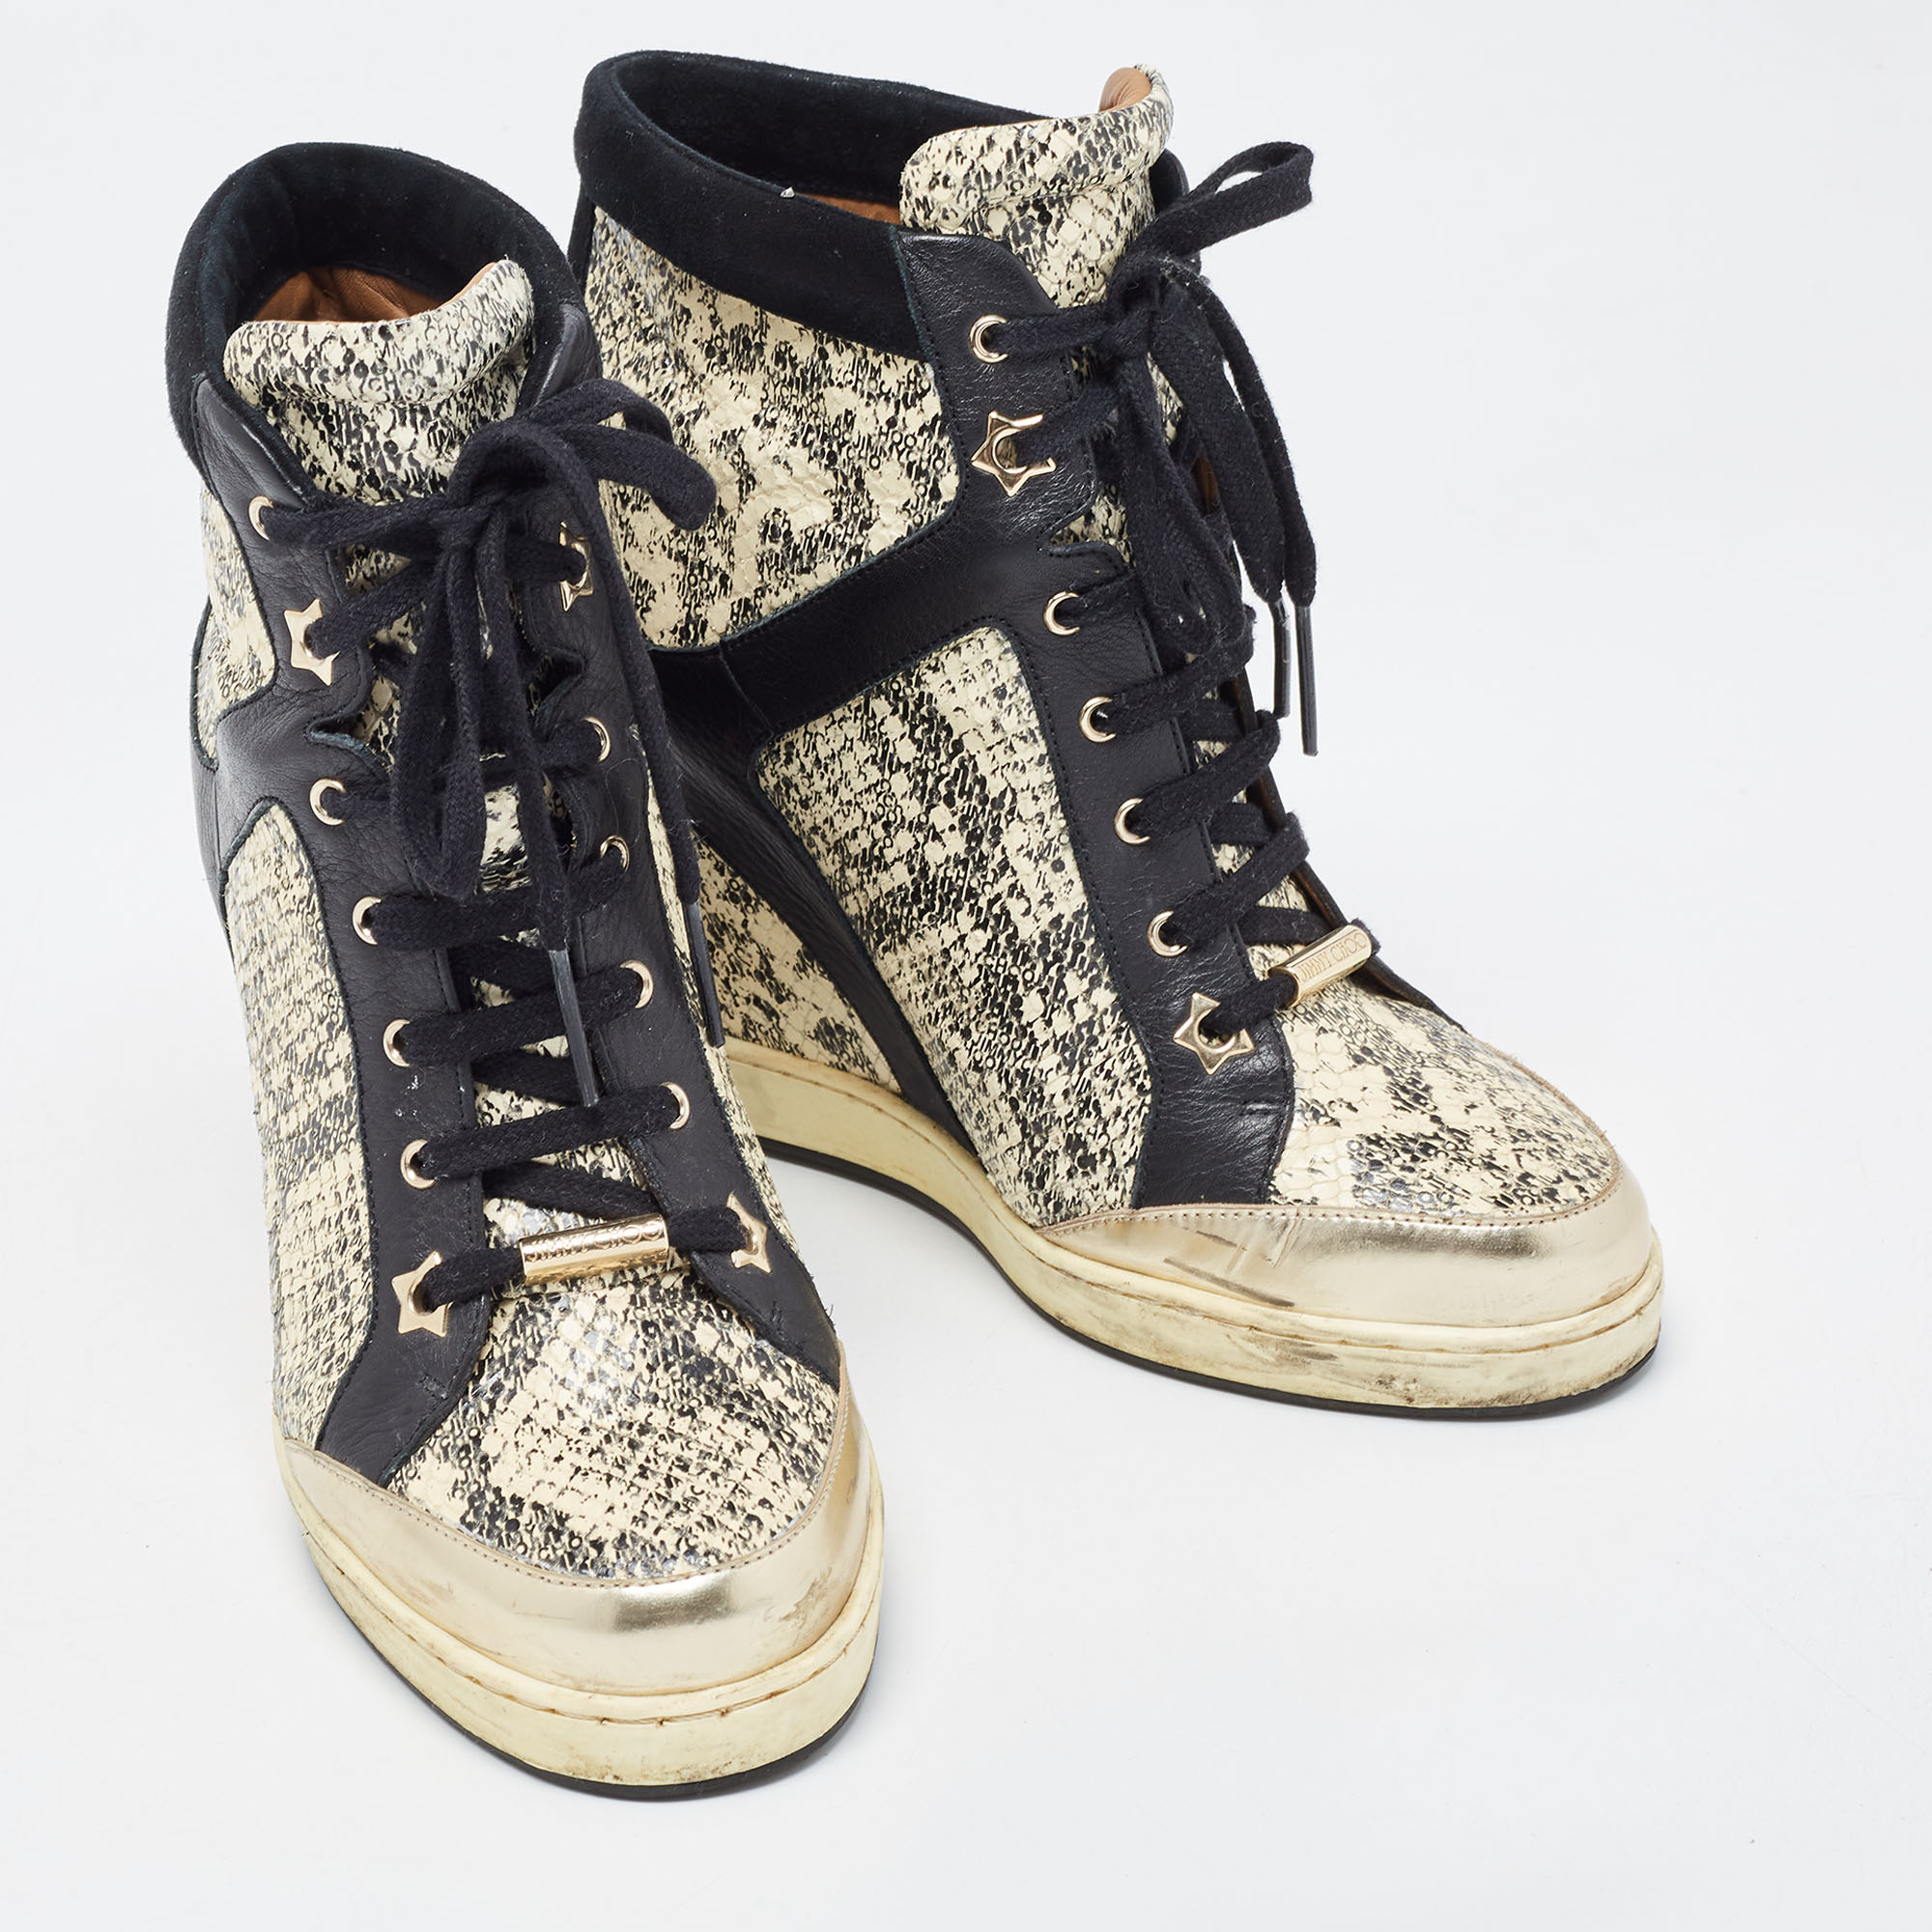 Jimmy Choo Cream/Black Python Embossed And Leather  Wedge Sneakers Size 38